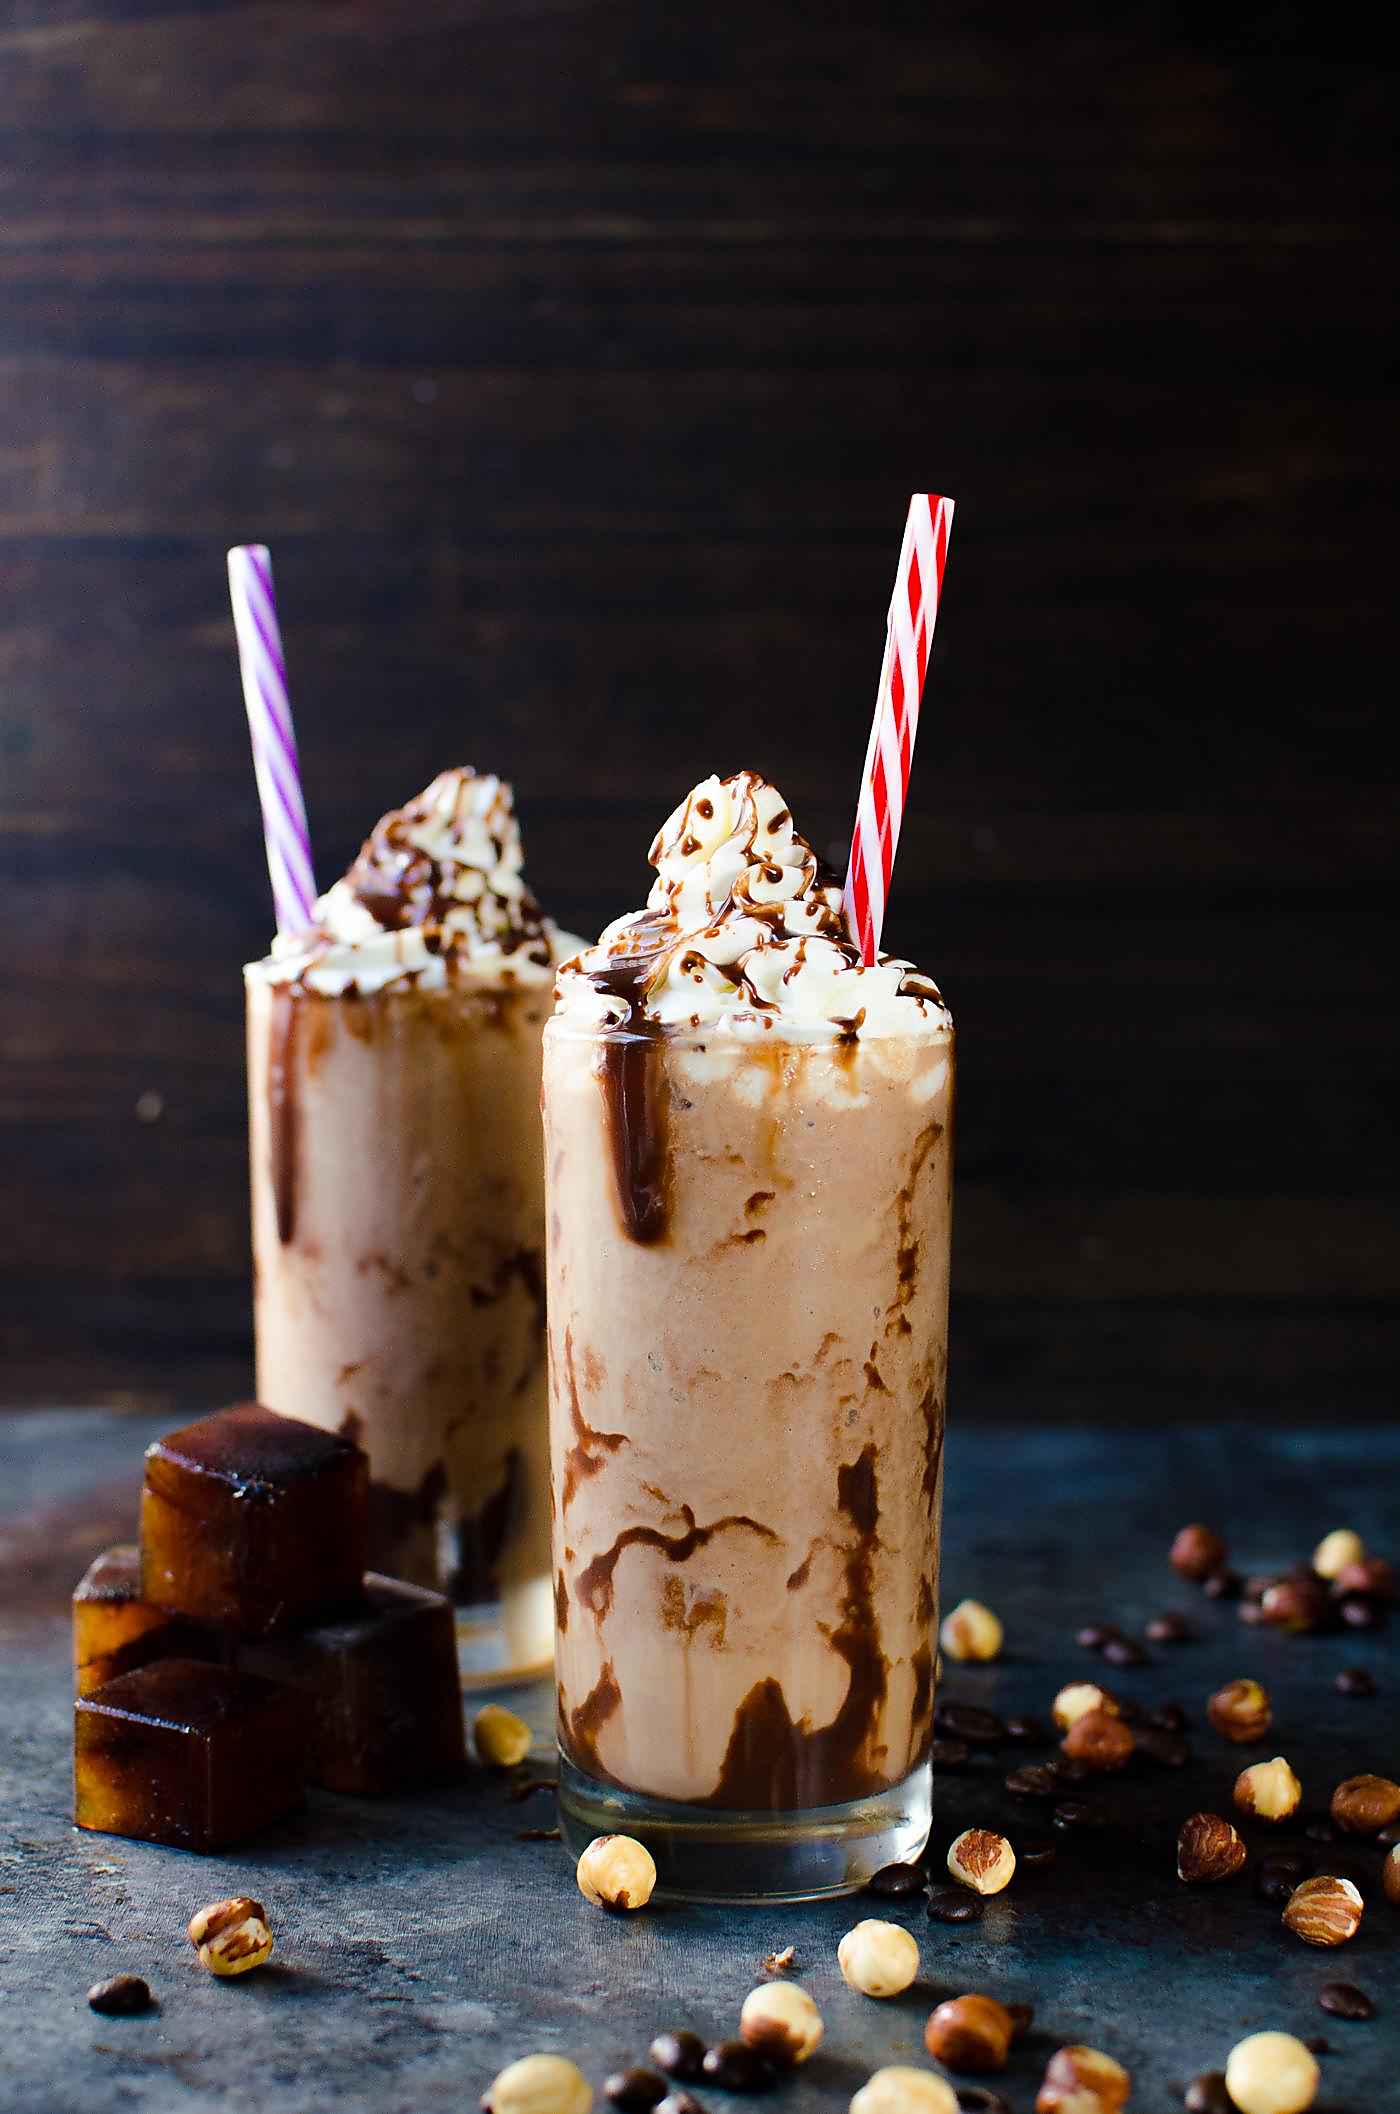  3 ingredient Nutella Frappuccino - This amazing Nutella Coffee Slushie is a cross between an icy frappuccino and a creamy milk shake, but with the added delicious hazelnut cocoa flavor of Nutella and a nice strong hit of coffee! Mornings have never been this good!